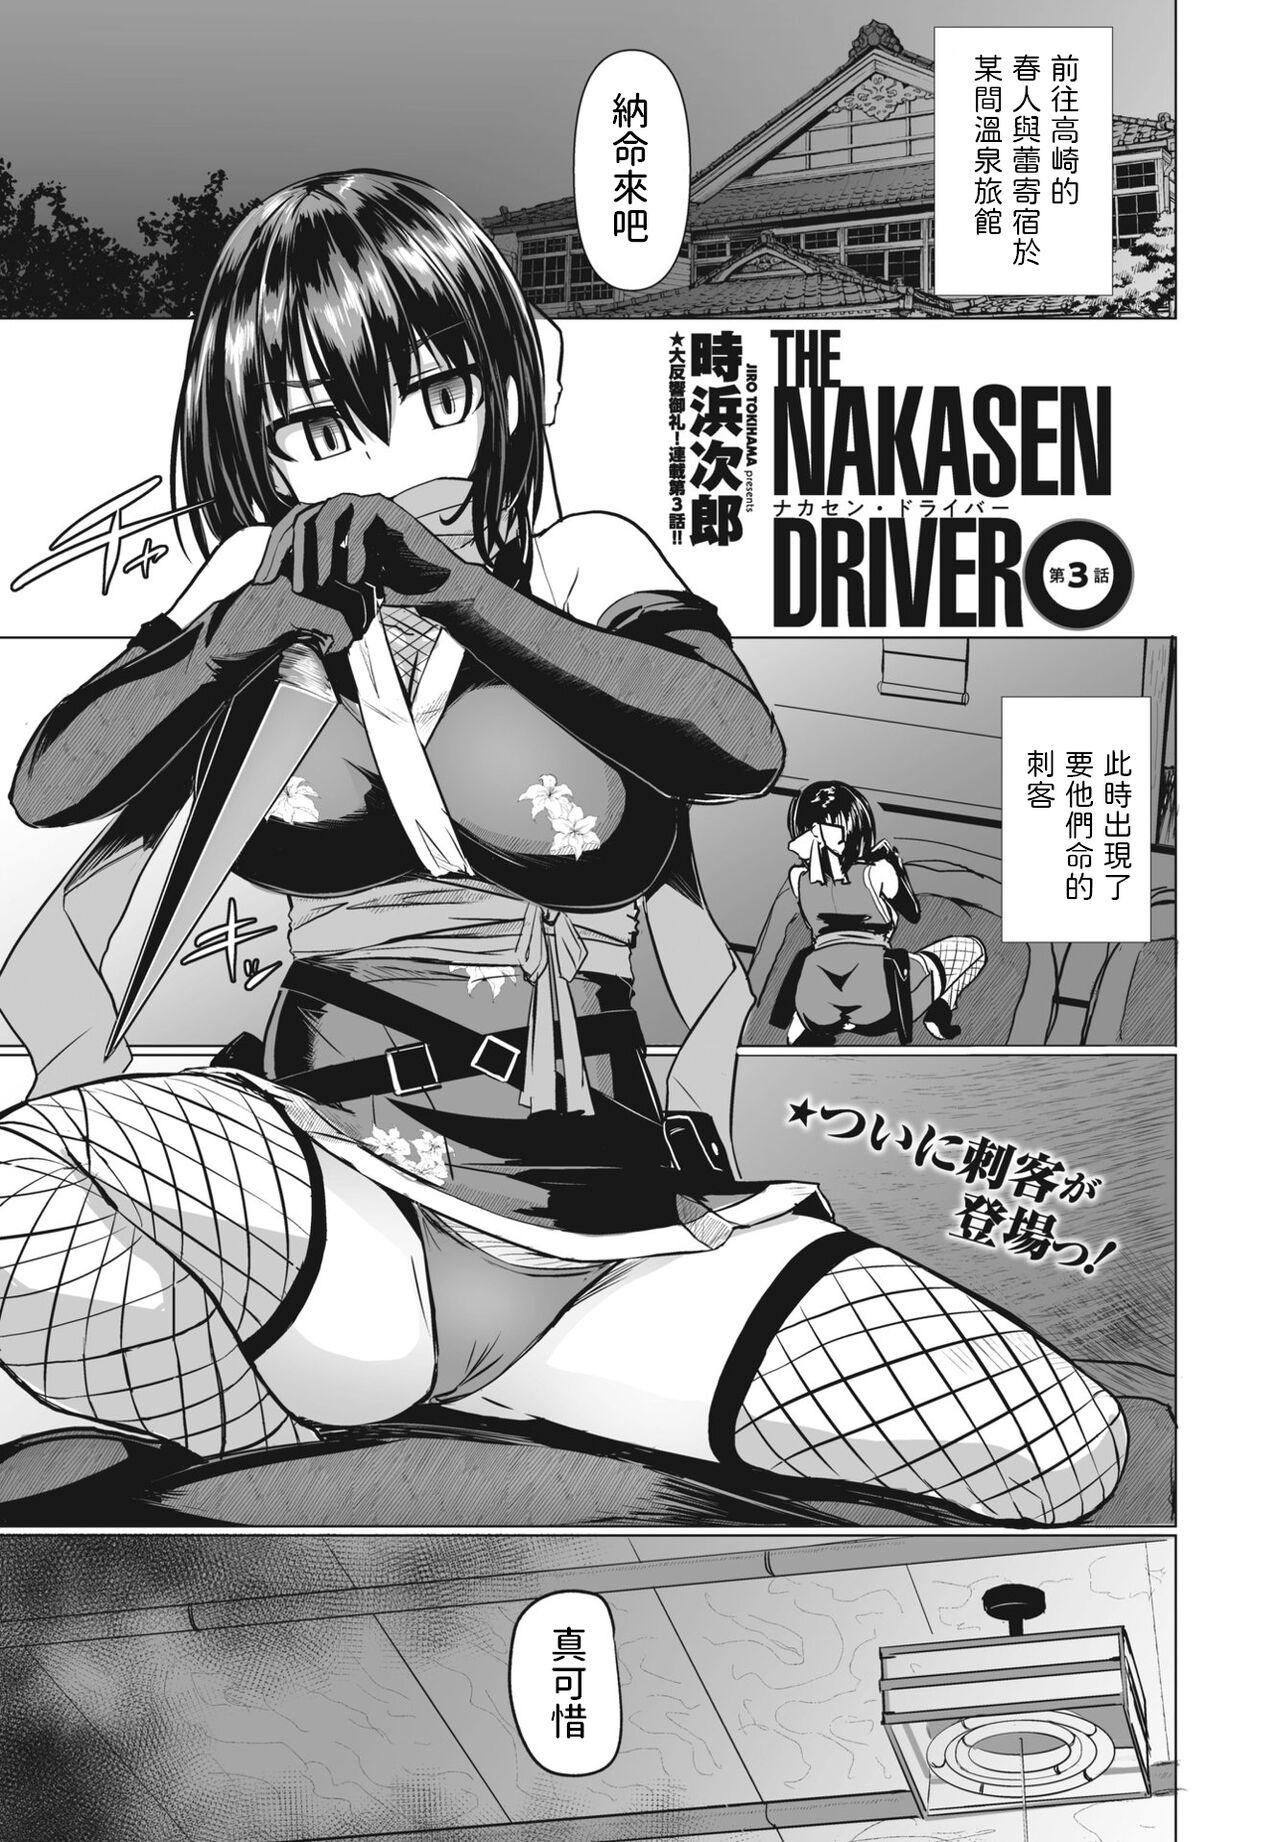 Russia THE NAKASEN DRIVER Ch. 3 Polla - Page 1